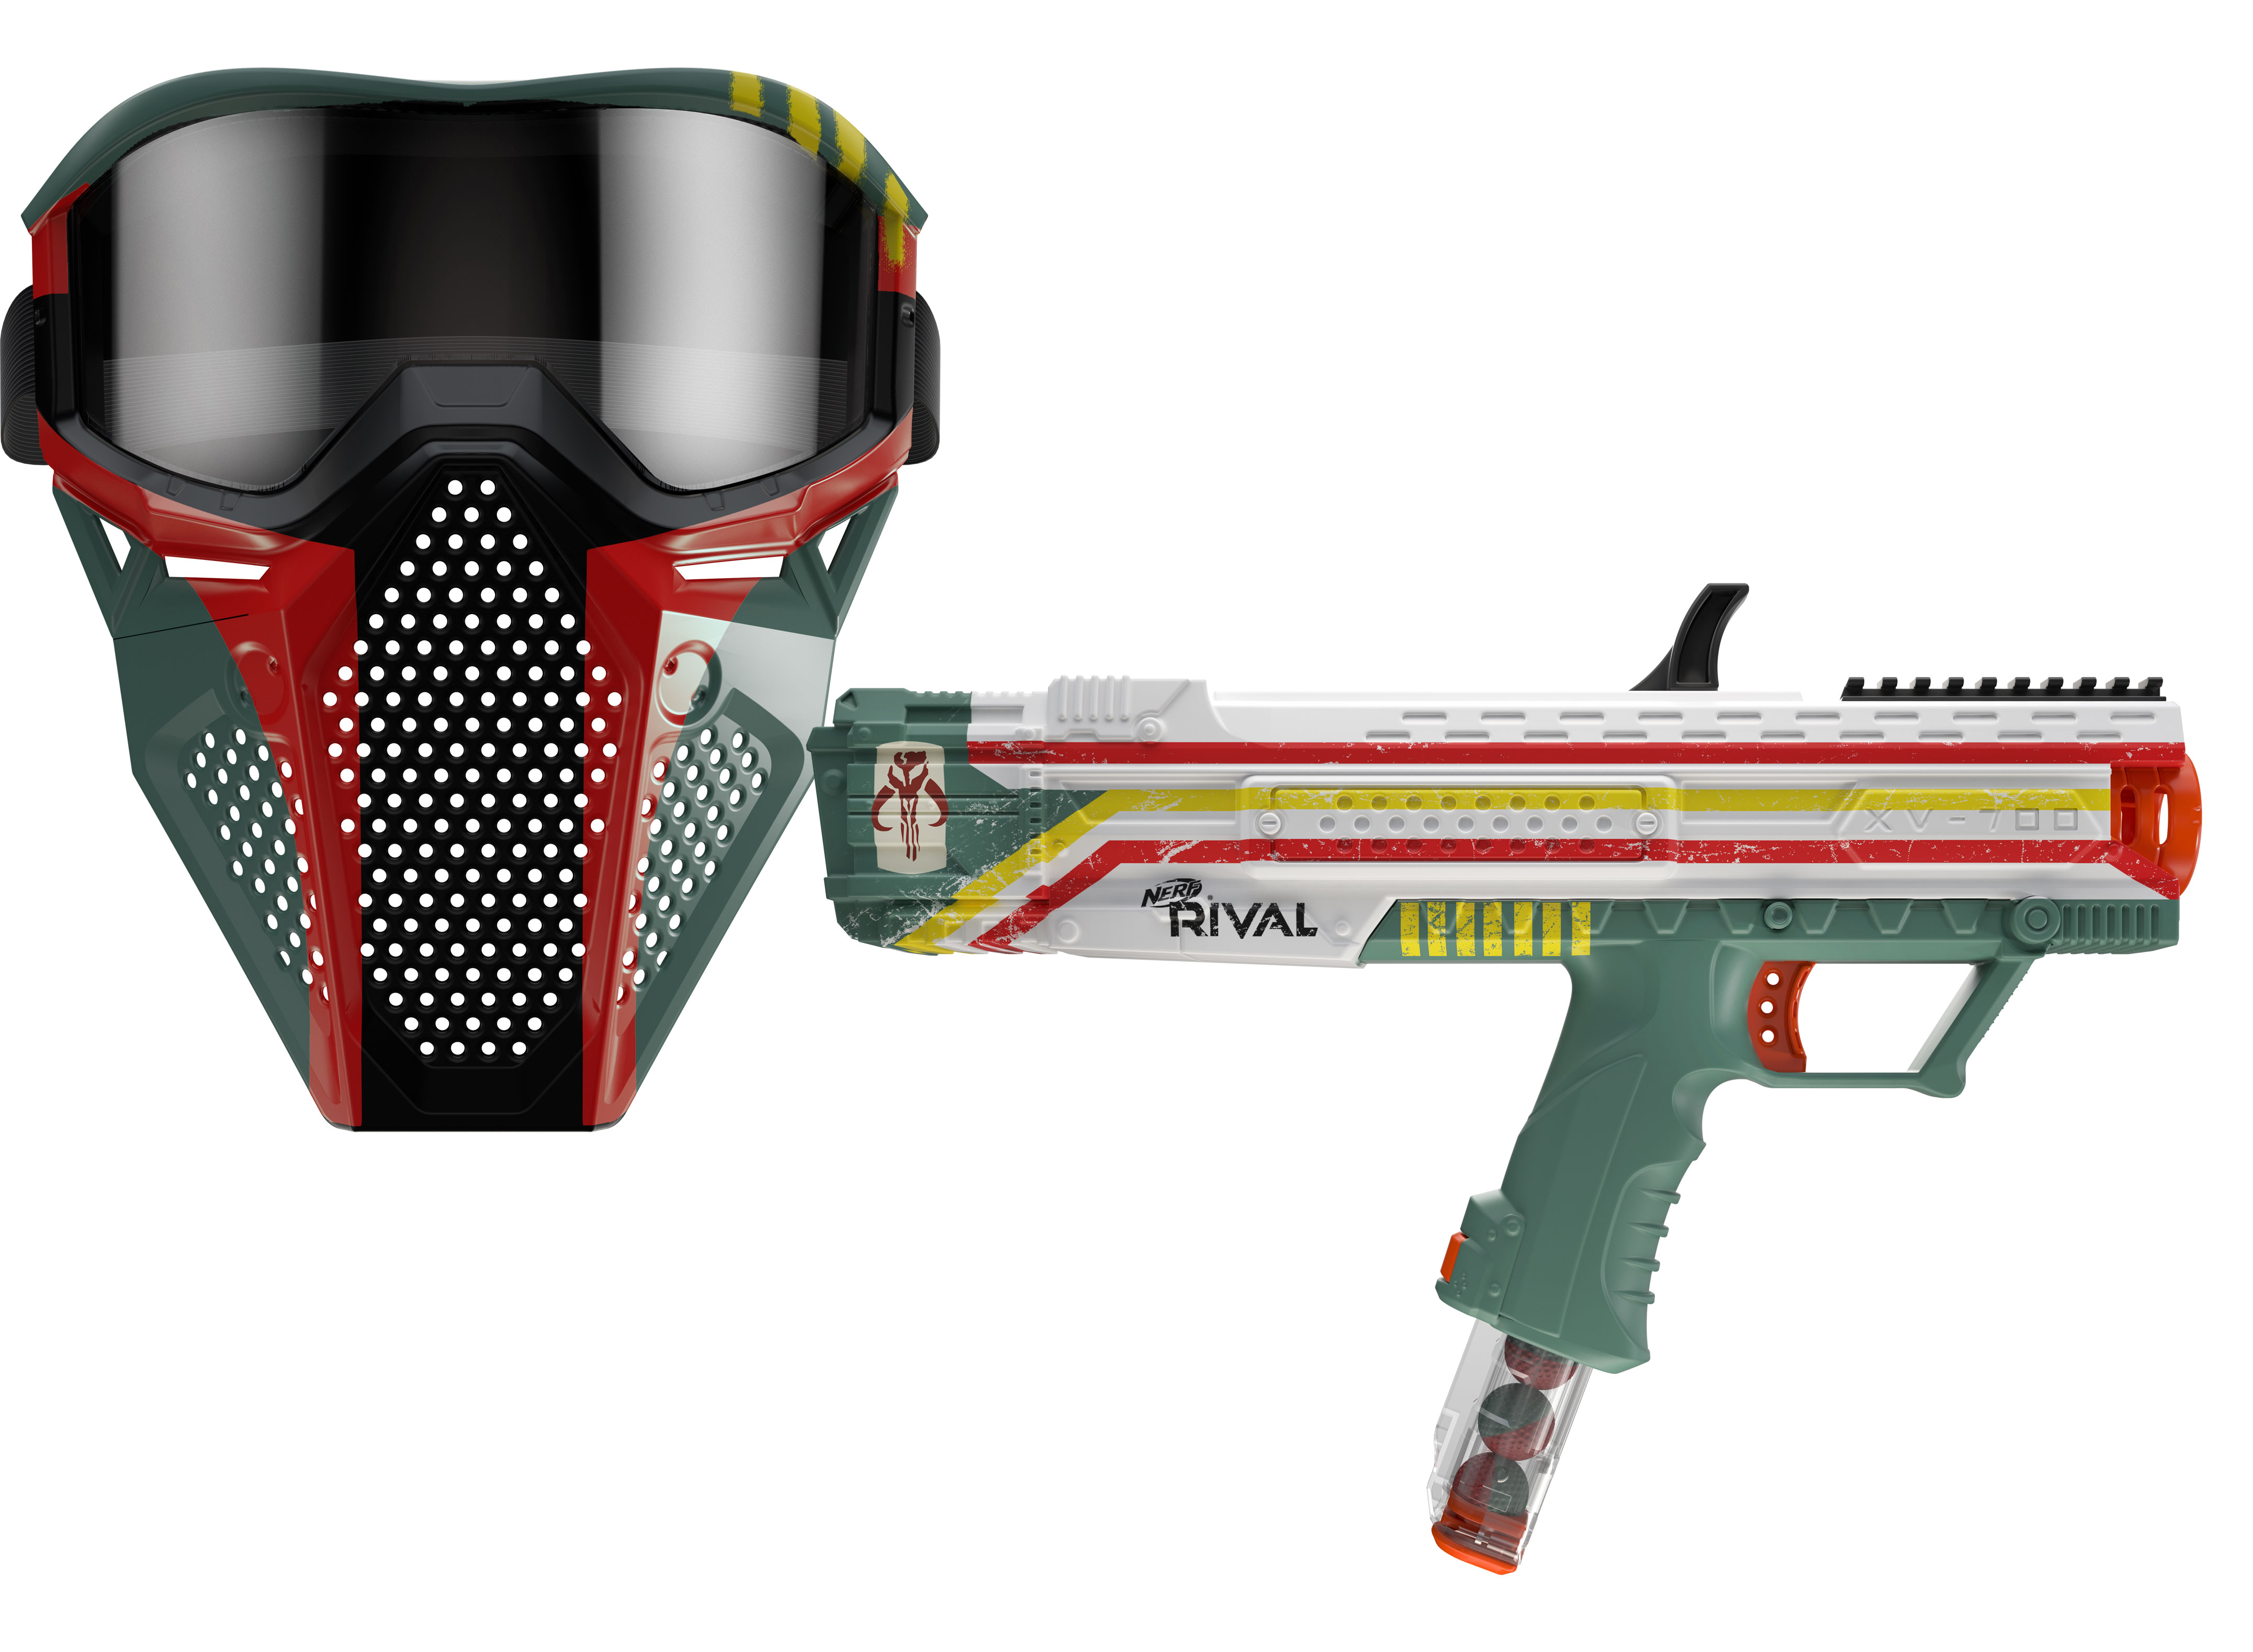 Nerf Rival Apollo Wars Mandalorian Edition Blaster Review + Giveaway! - SheSaved®